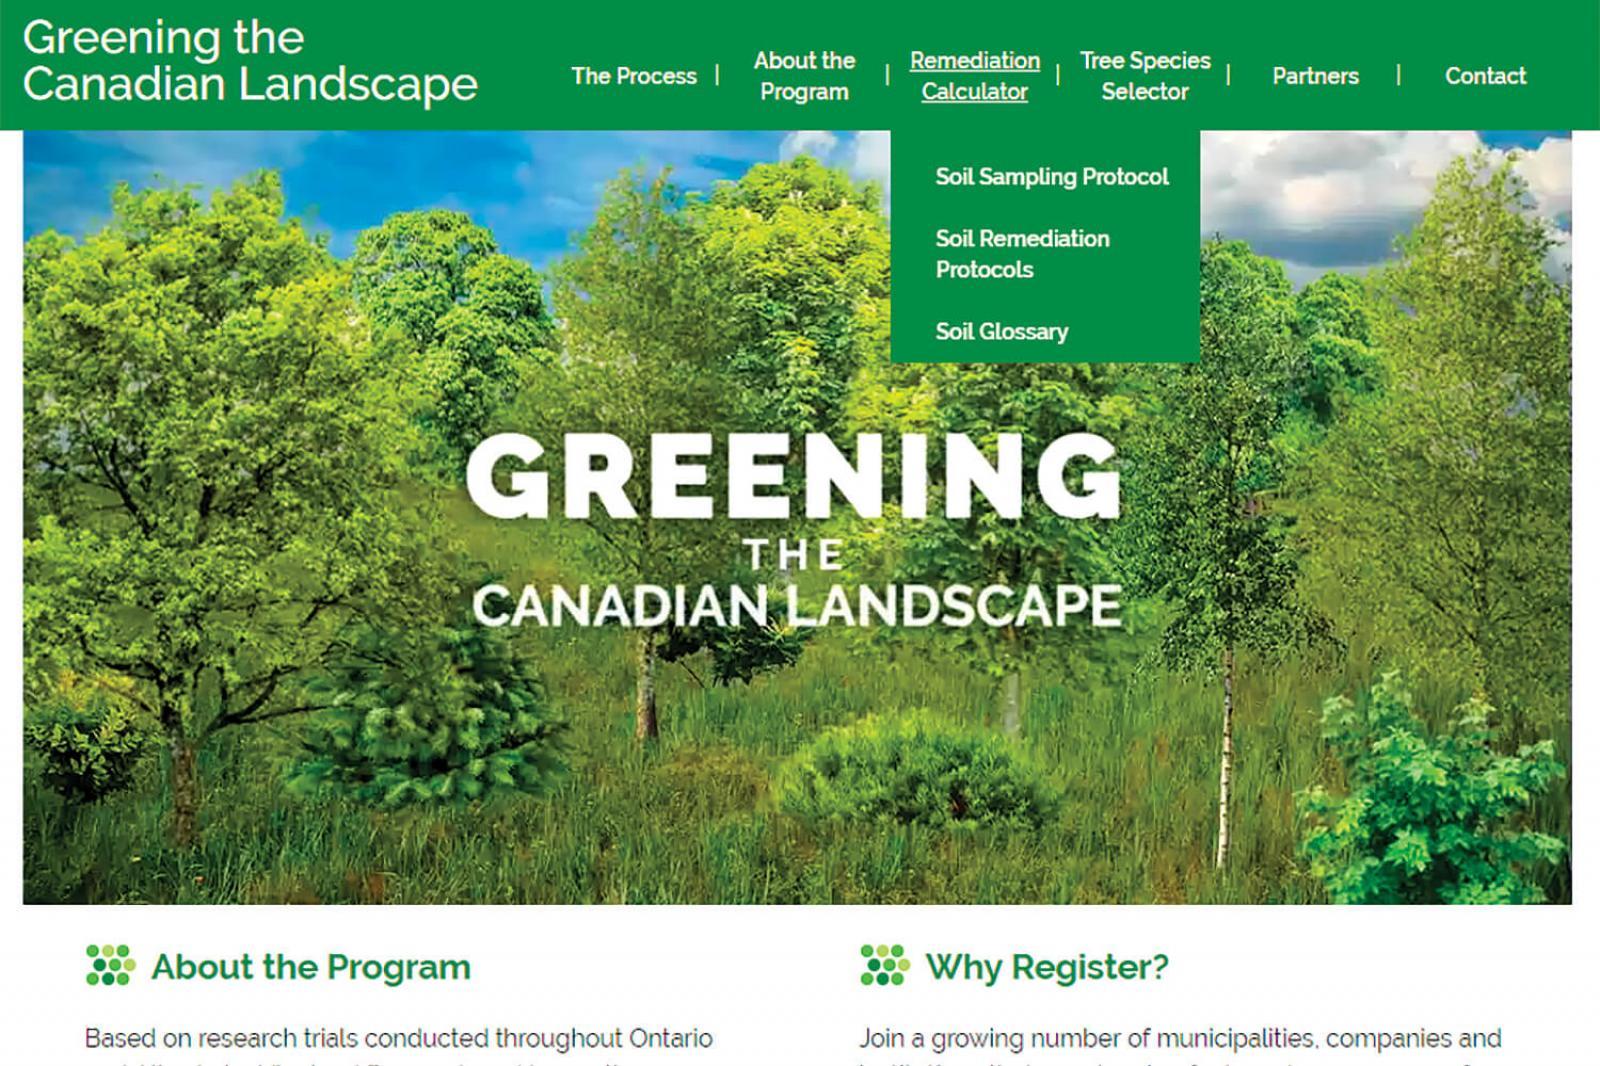 Vineland’s newest online tool to help growers and green industry professionals.